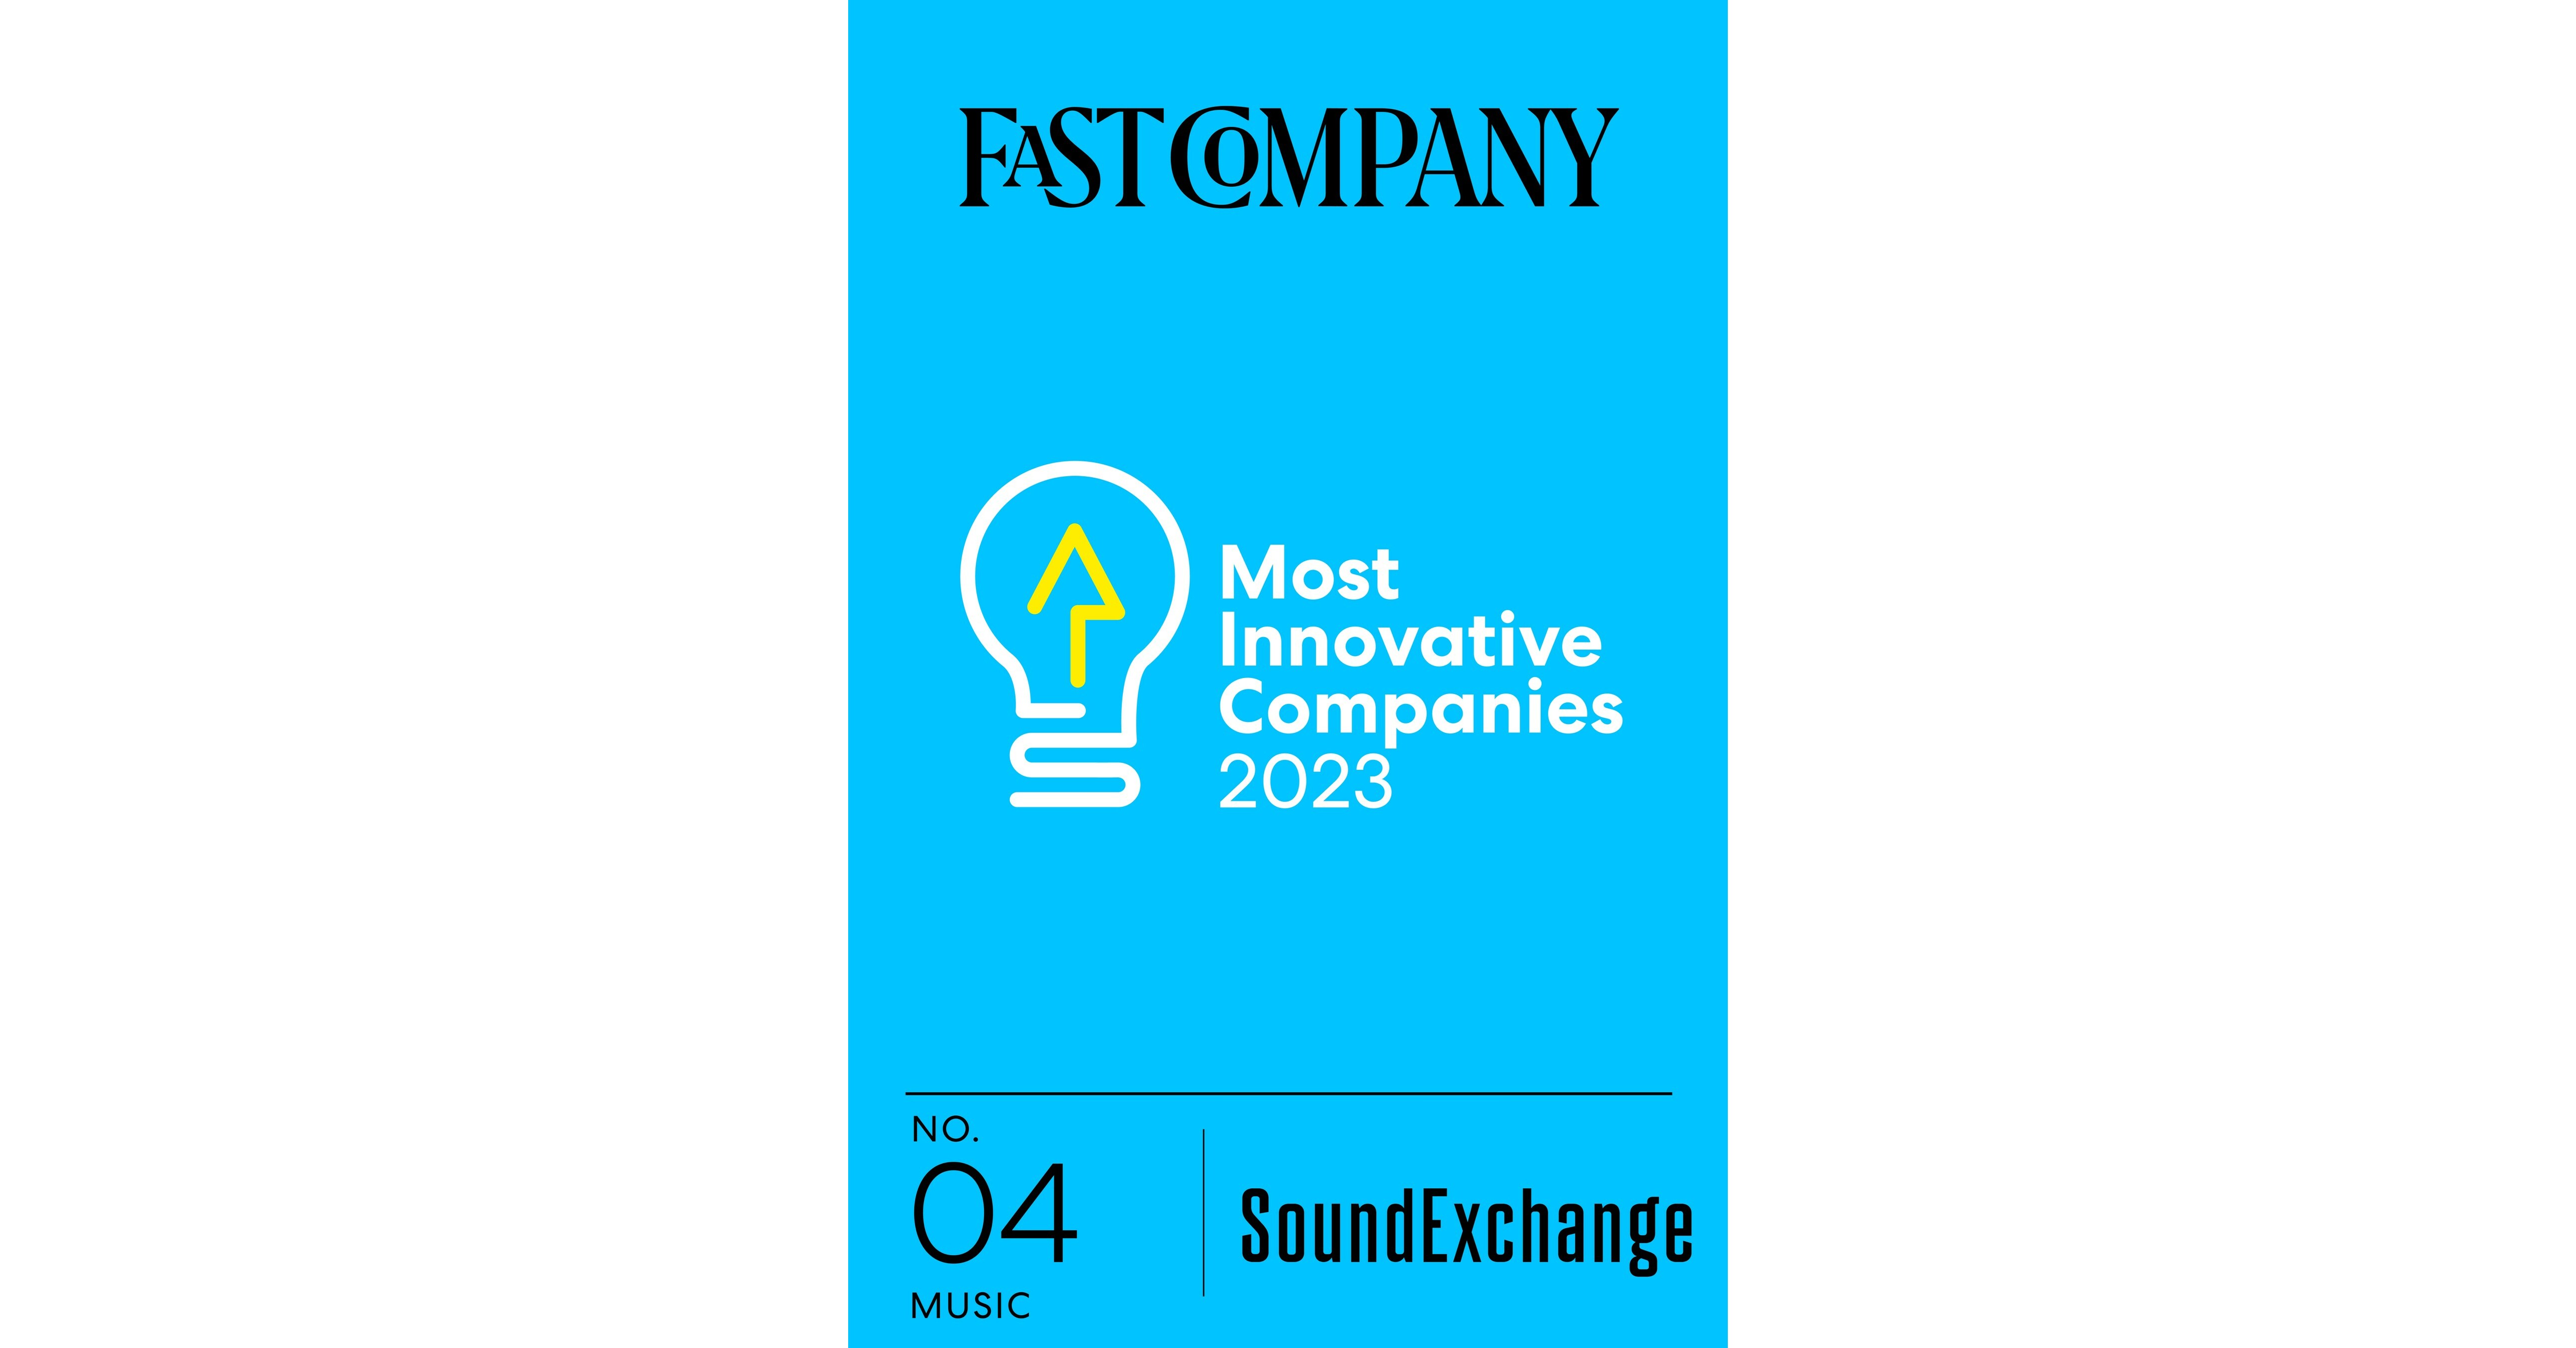 Flutterwave Named Fast Company's Most Innovative Company for